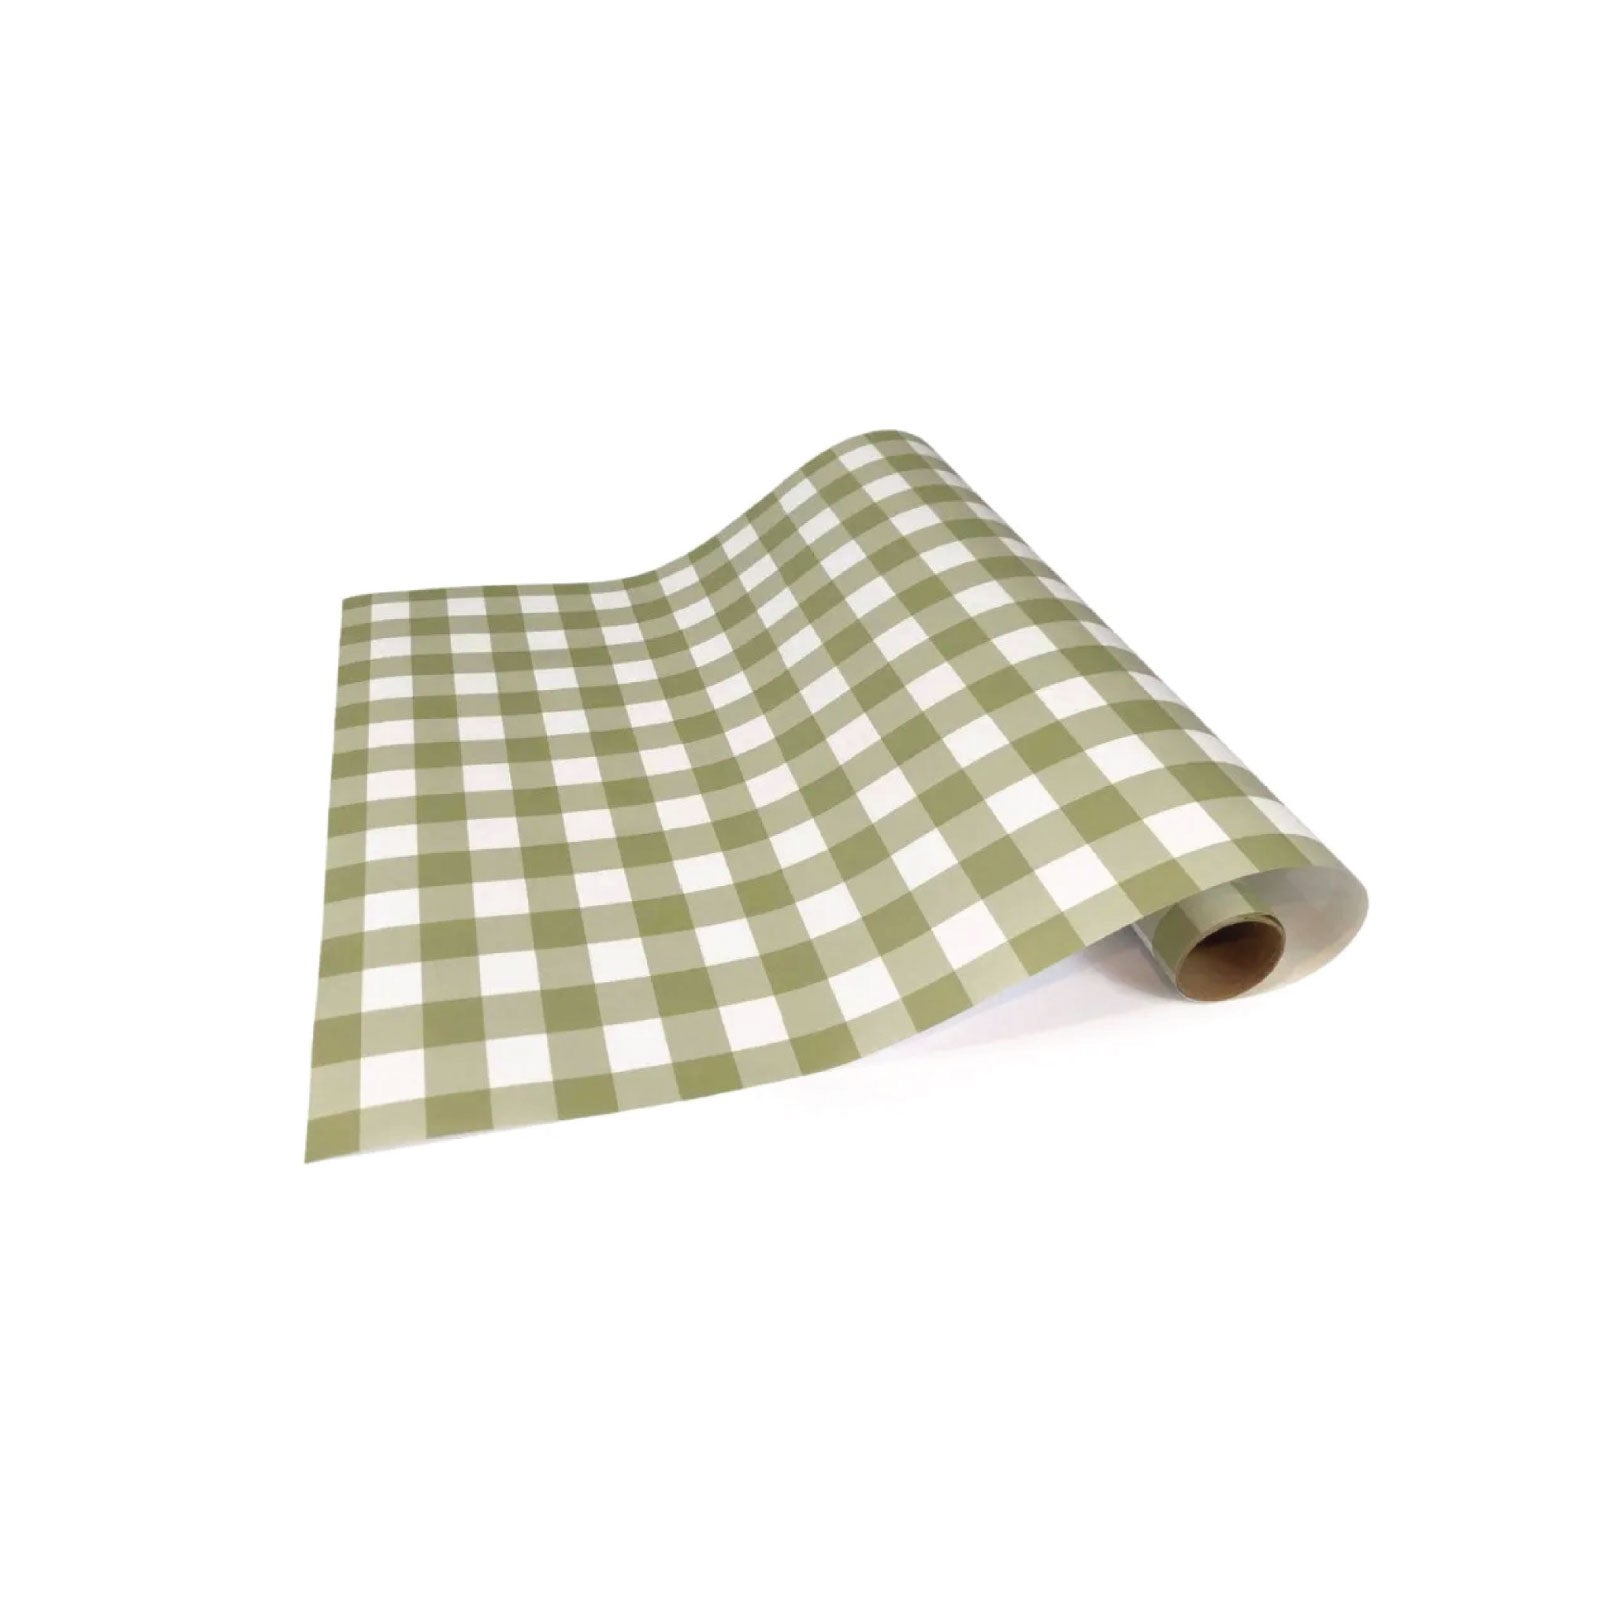 Picnic Check Paper Table Runner in Green